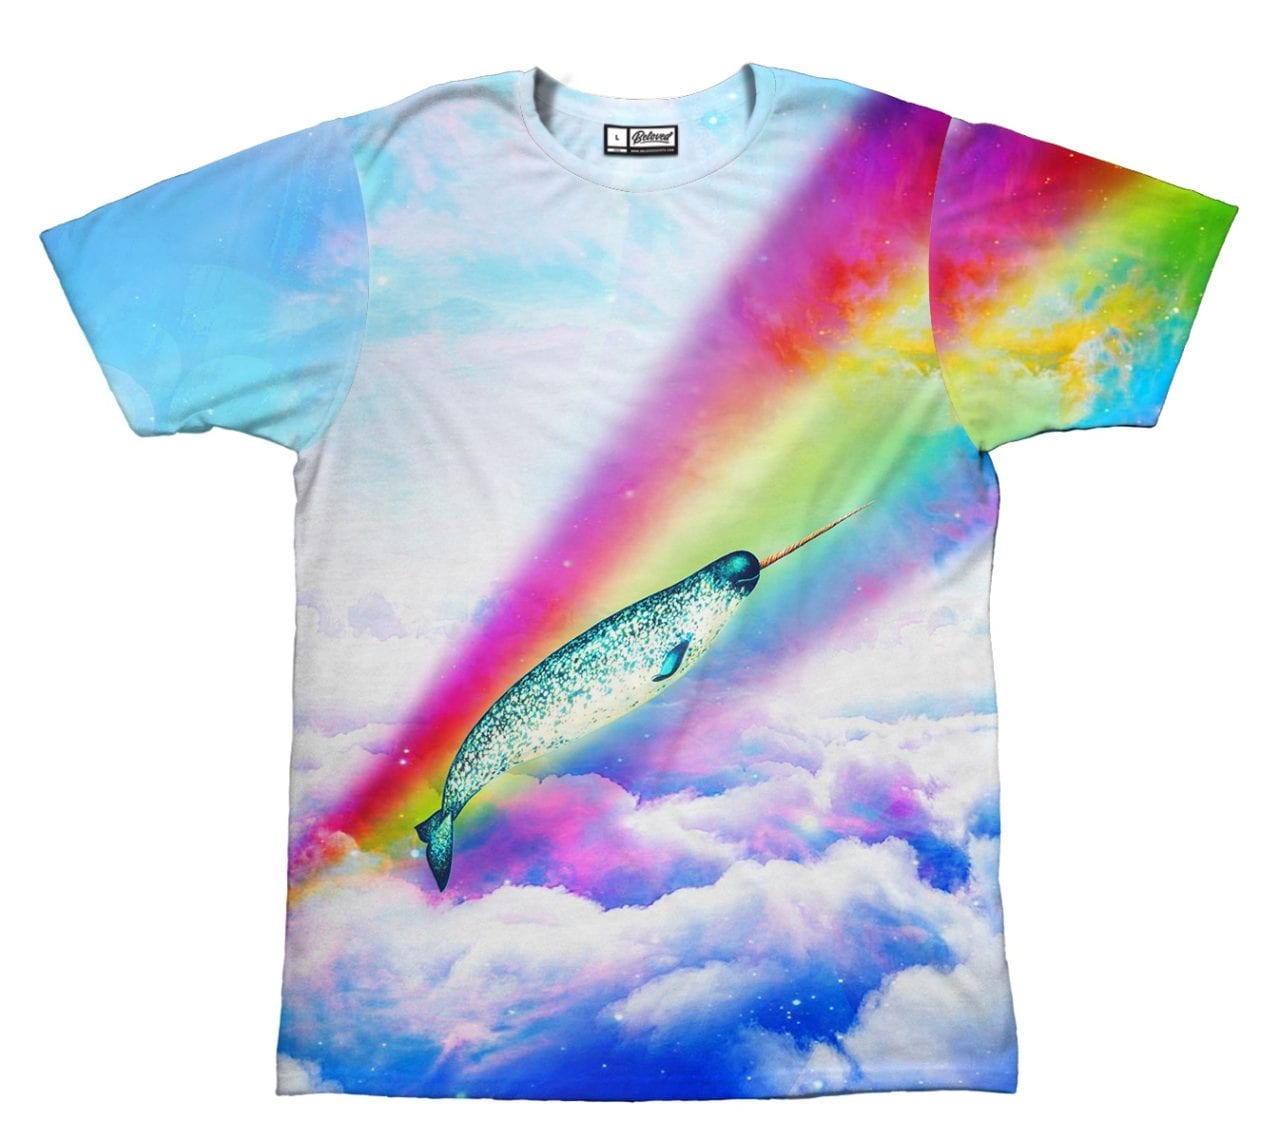 Flight of the Narwhal - Go a little crazy and brand yourself a product of the internet with the ultimate fantasy creature – the narwhal. Add in some rainbows and clouds and you’re all that much cooler.